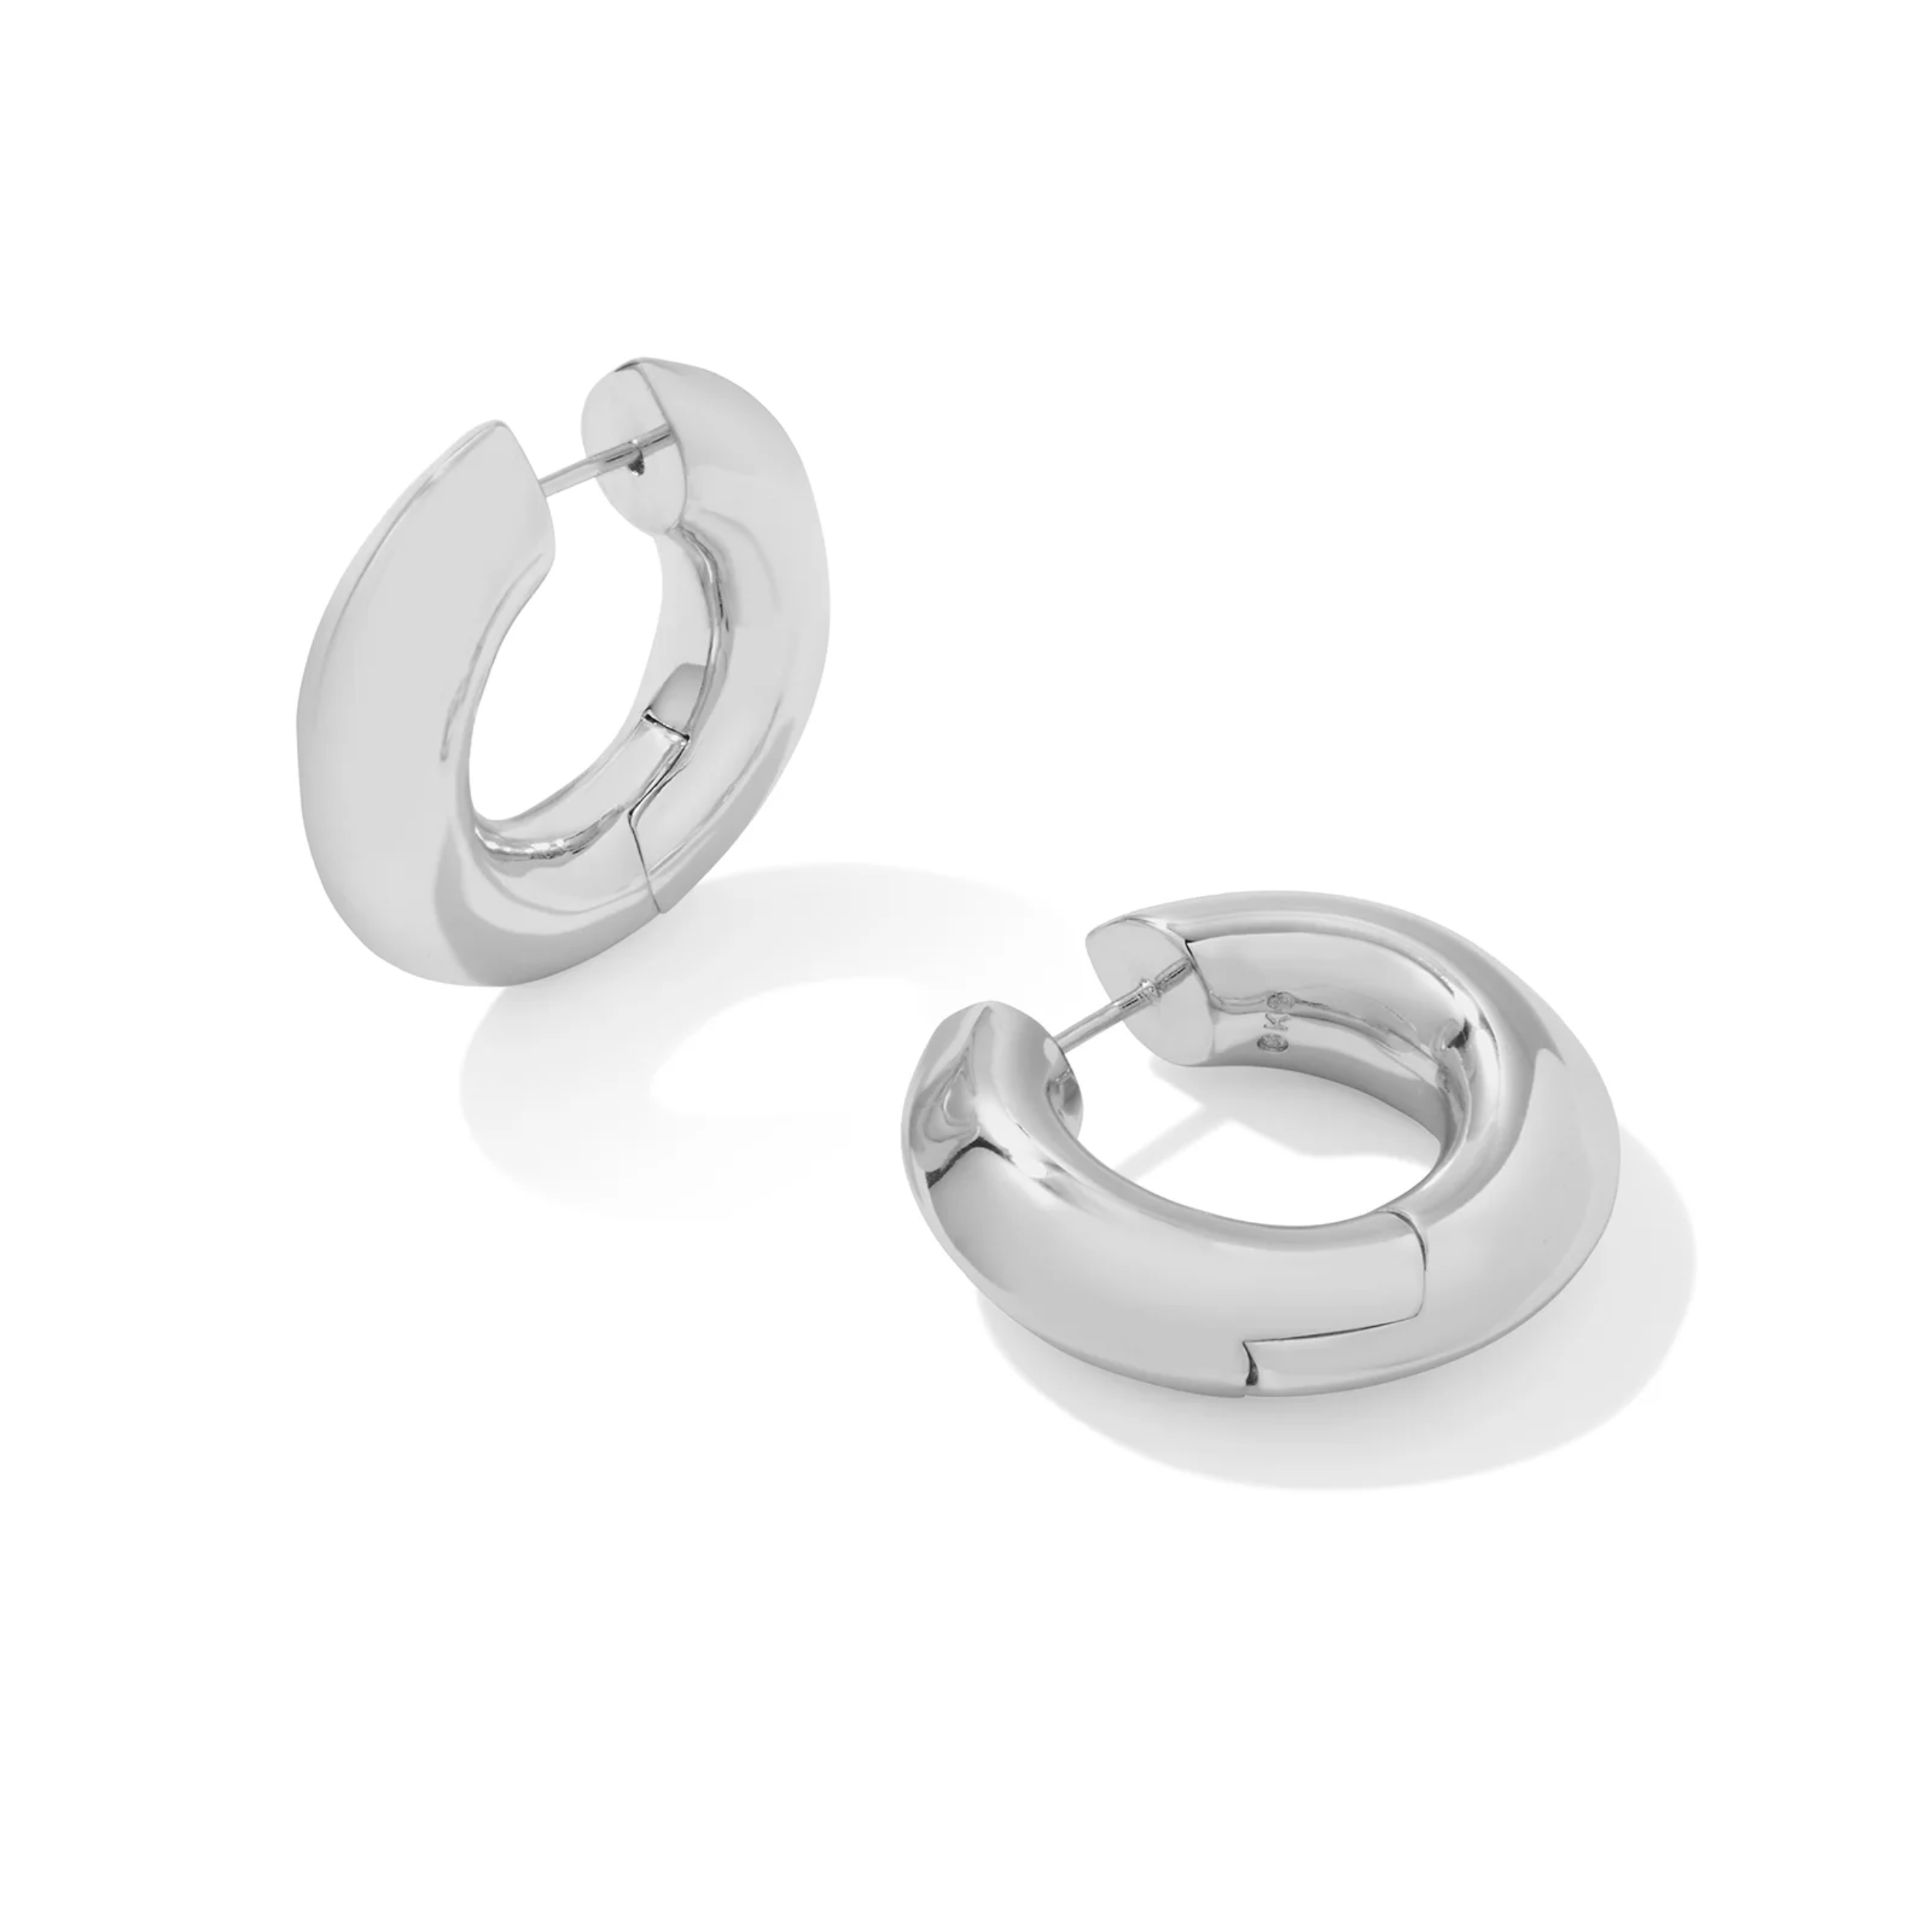 These Mikki Silver Metal Hoop earrings in Polished Metal by Kendra Scott are pictured on a white background.